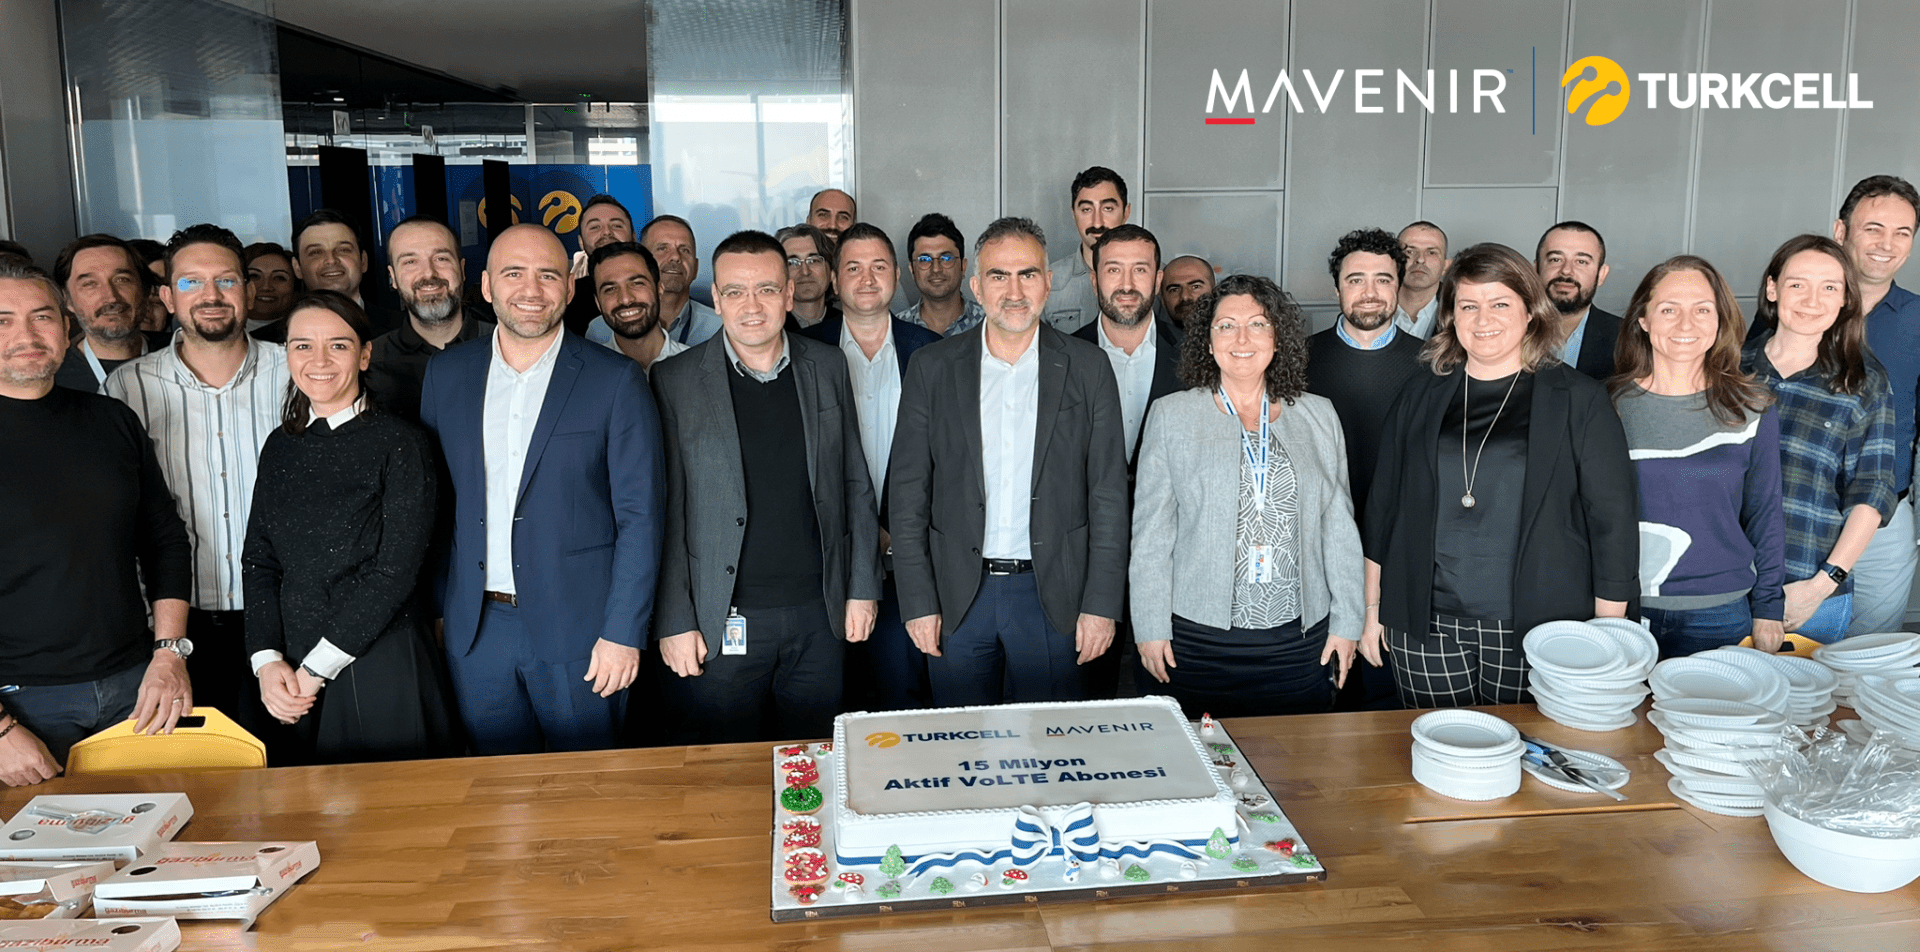 Mavenir Joins Turkcell in Celebrating a Milestone in Voice Digitalization – 15 Million VoLTE/VoWiFi Active Subscribers on Turkcell’s Network